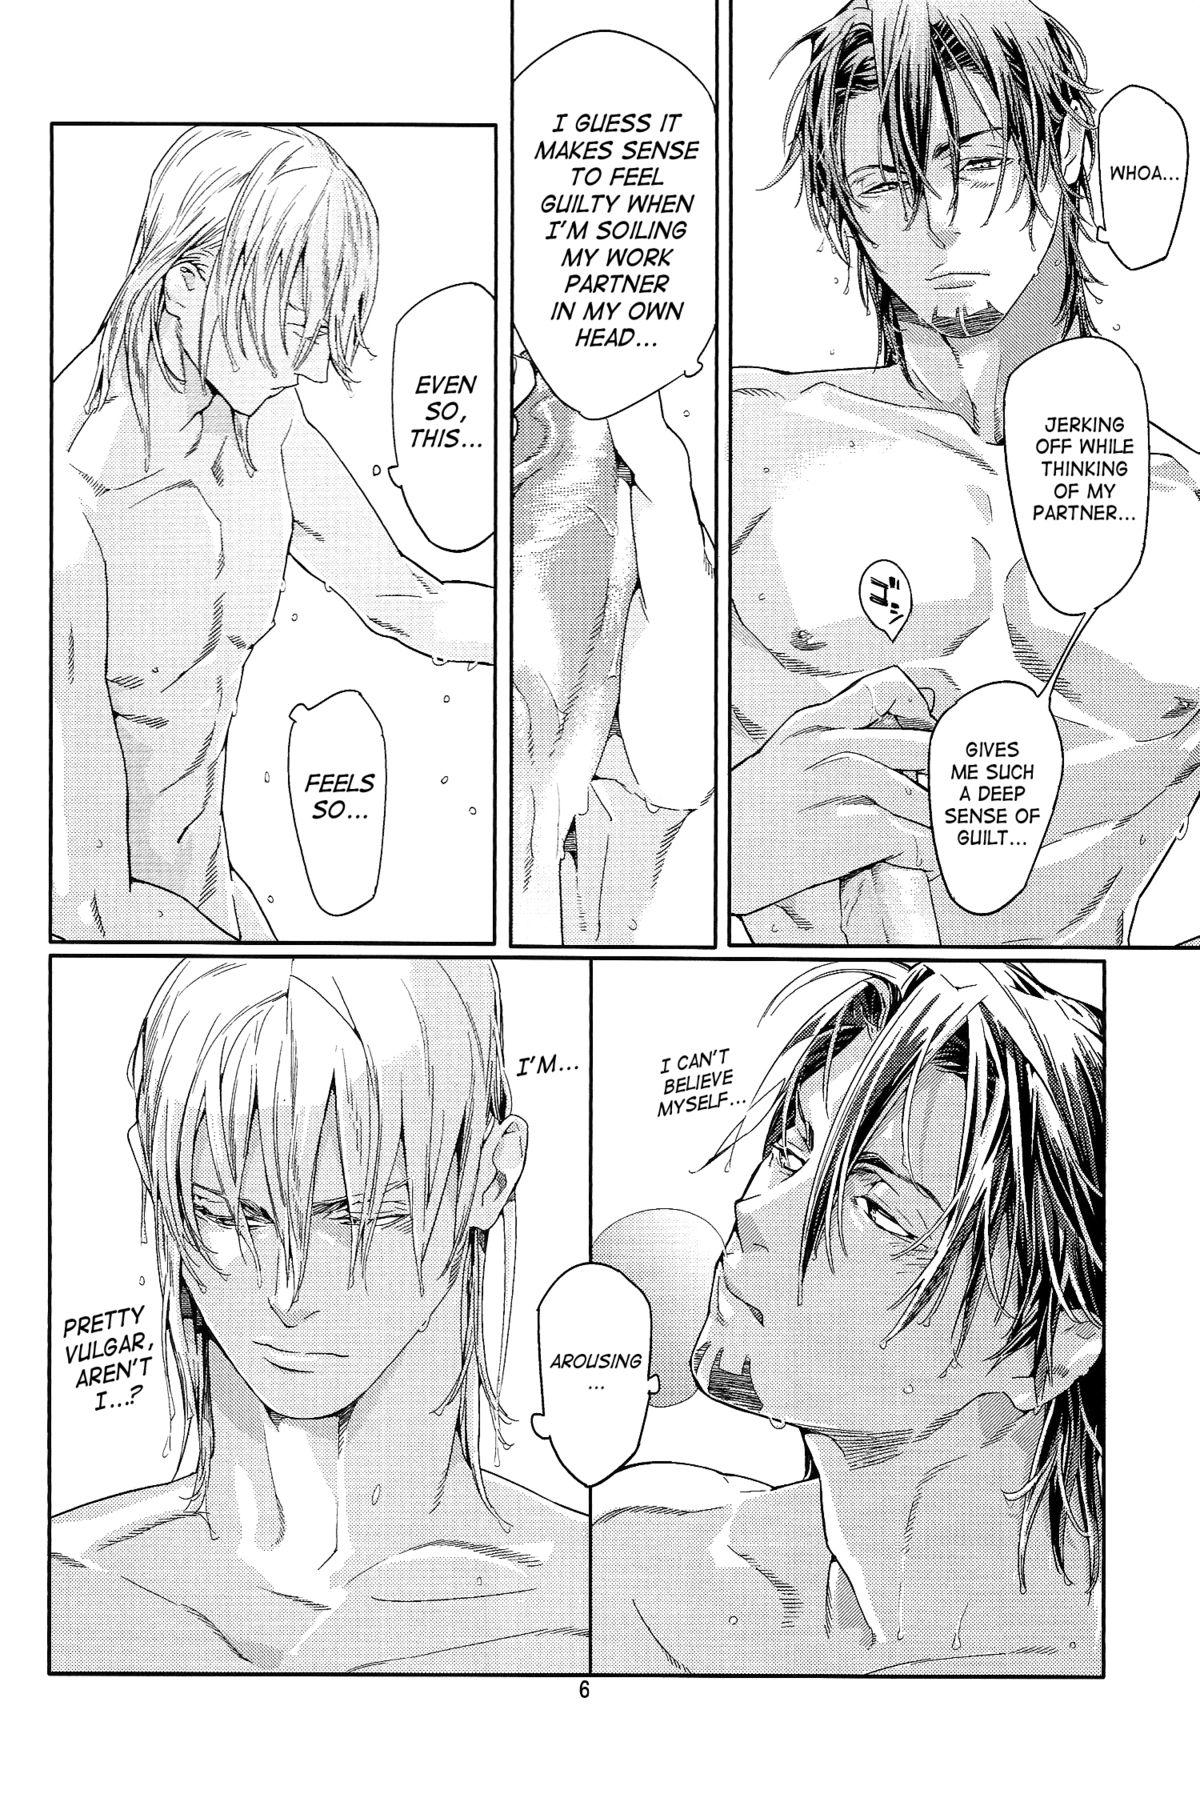 Parody CANDY MAN Vol. 3 - Tiger and bunny Soapy - Page 4